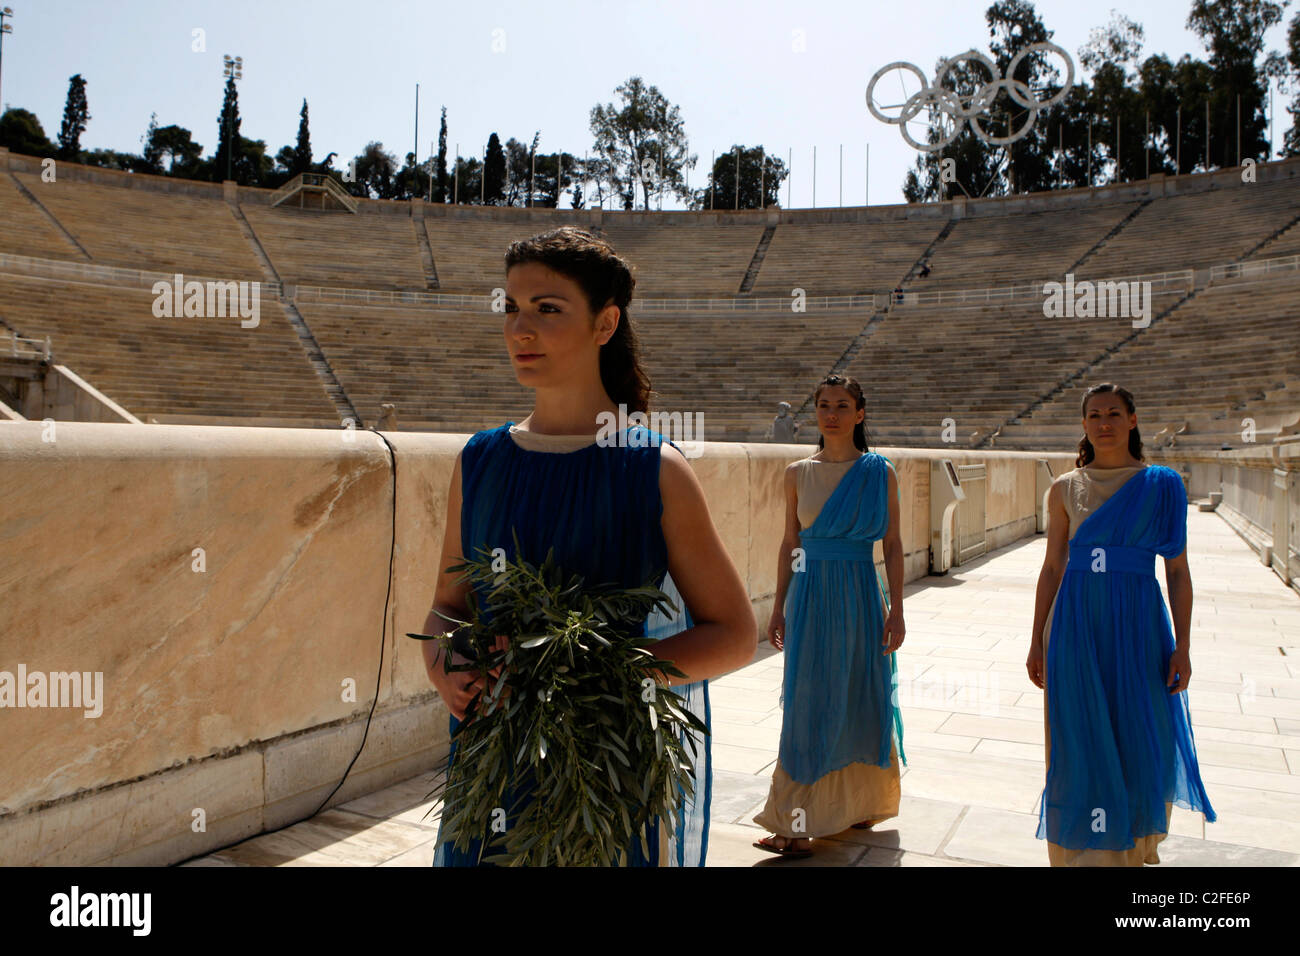 Revival of the Olympic games on modern times in Panathenaikon stadium ...